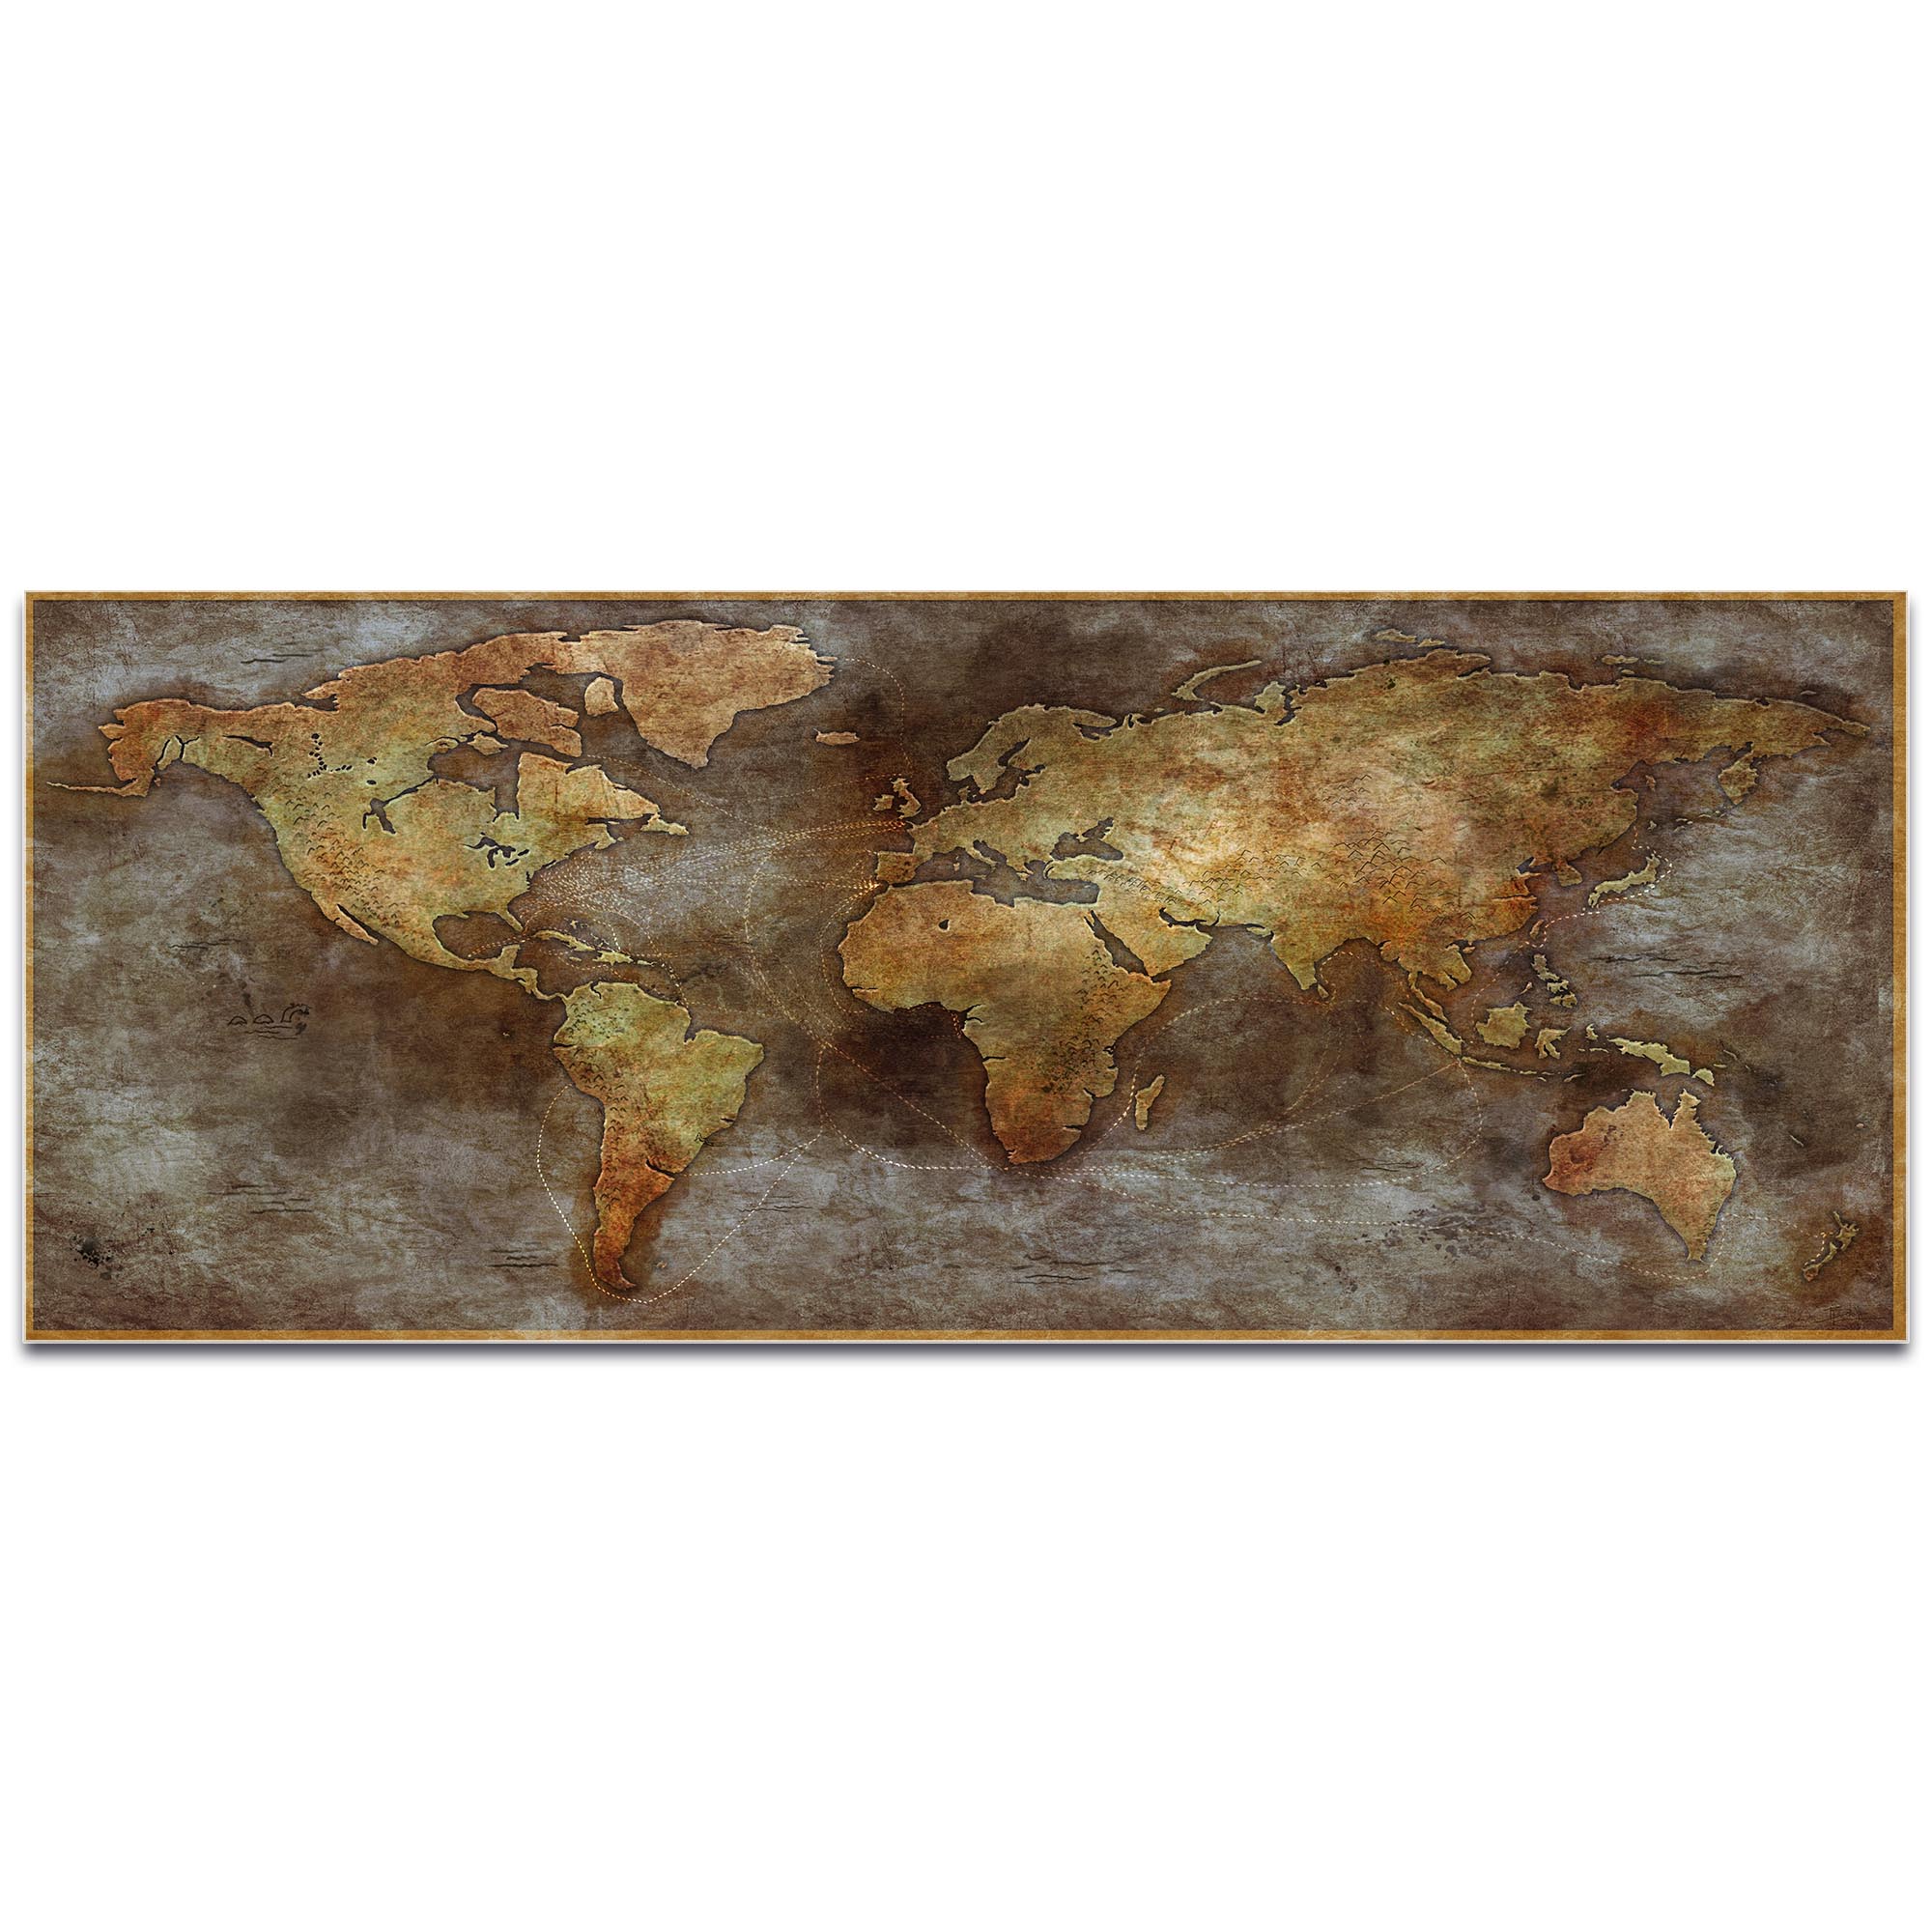 World Map Art '1800s Trade Routes Map' - Old World Wall Decor on Metal or Acrylic - Image 2